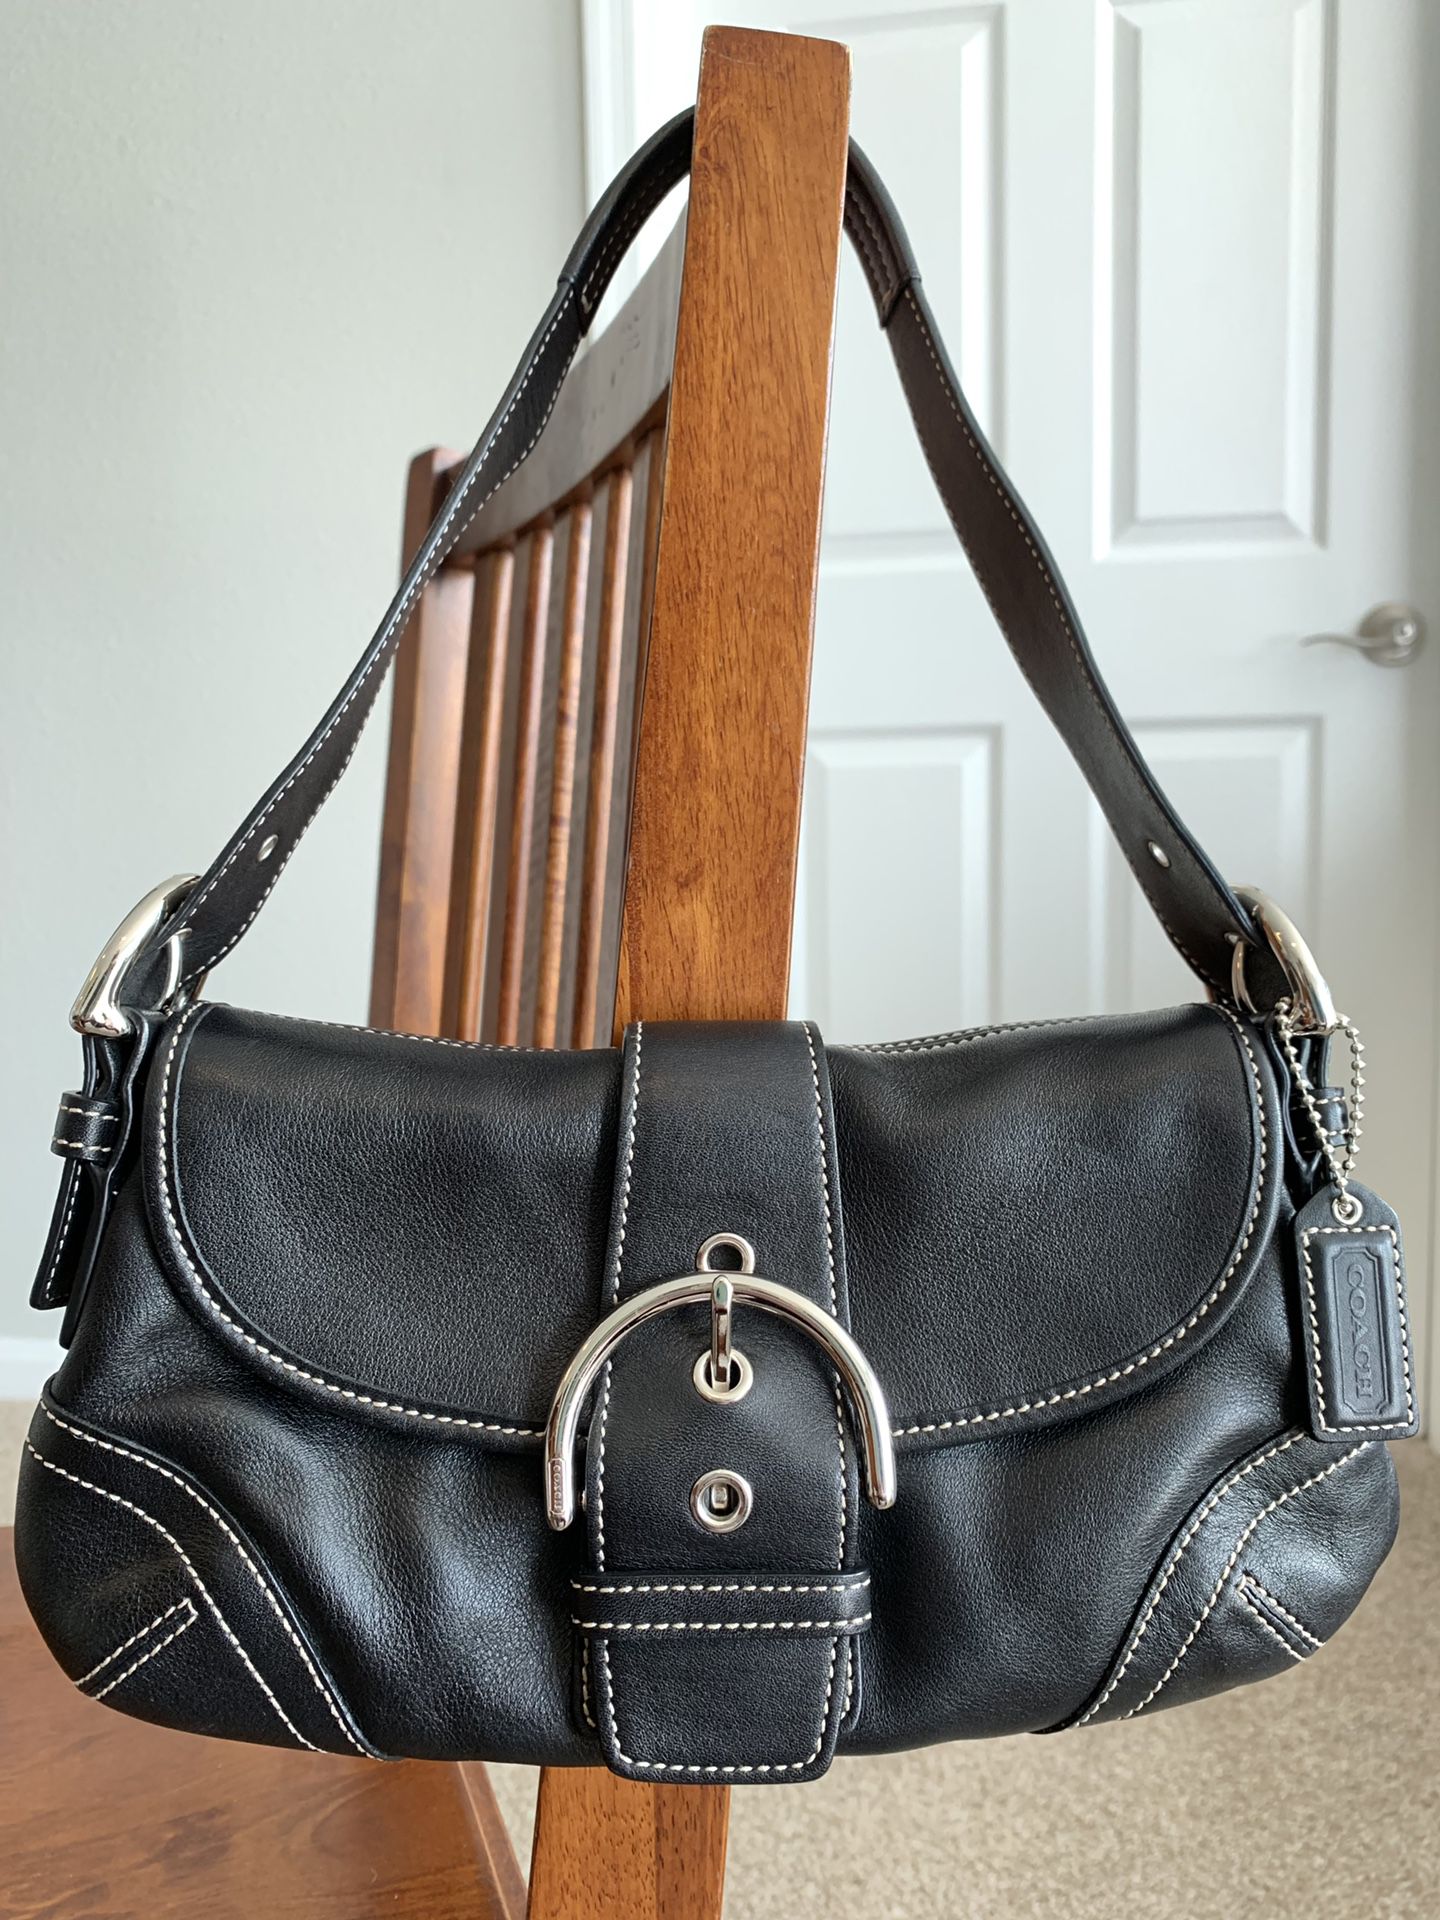 Authentic Coach Soho Hobo Bag with Buckle Flap Closure